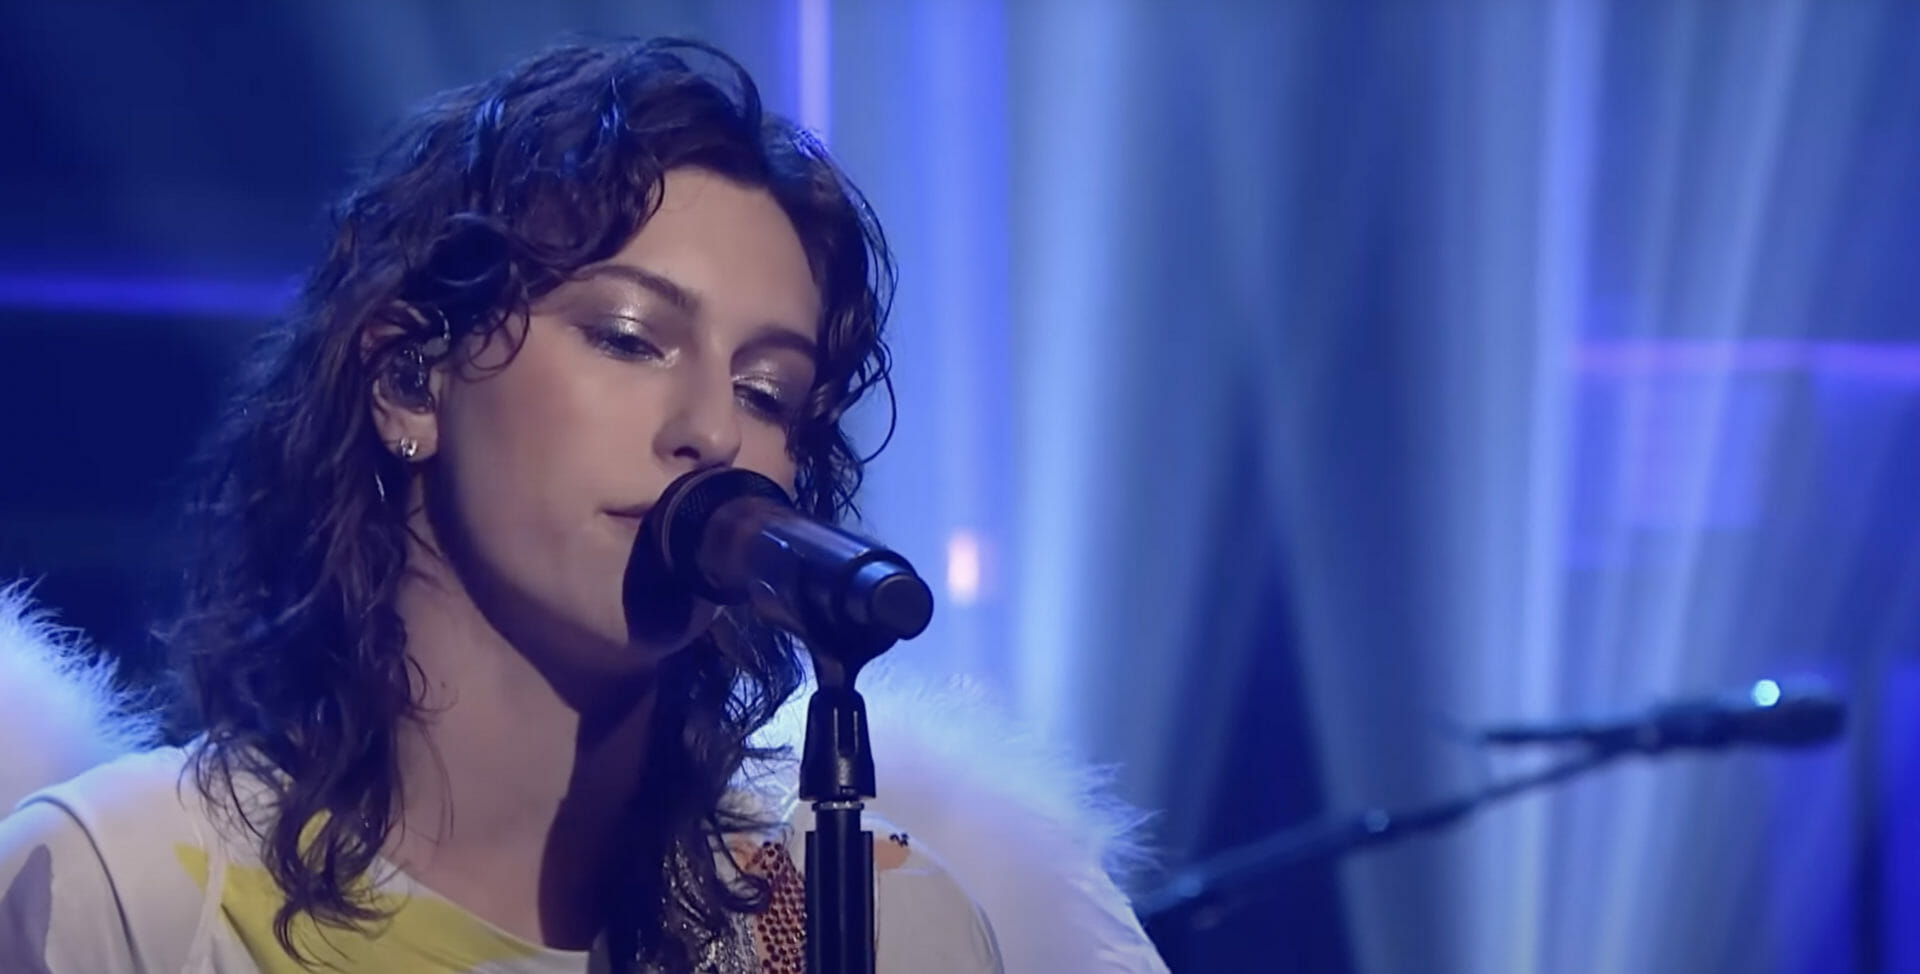 Watch: King Princess Performs “Let Us Die” on ‘Fallon’